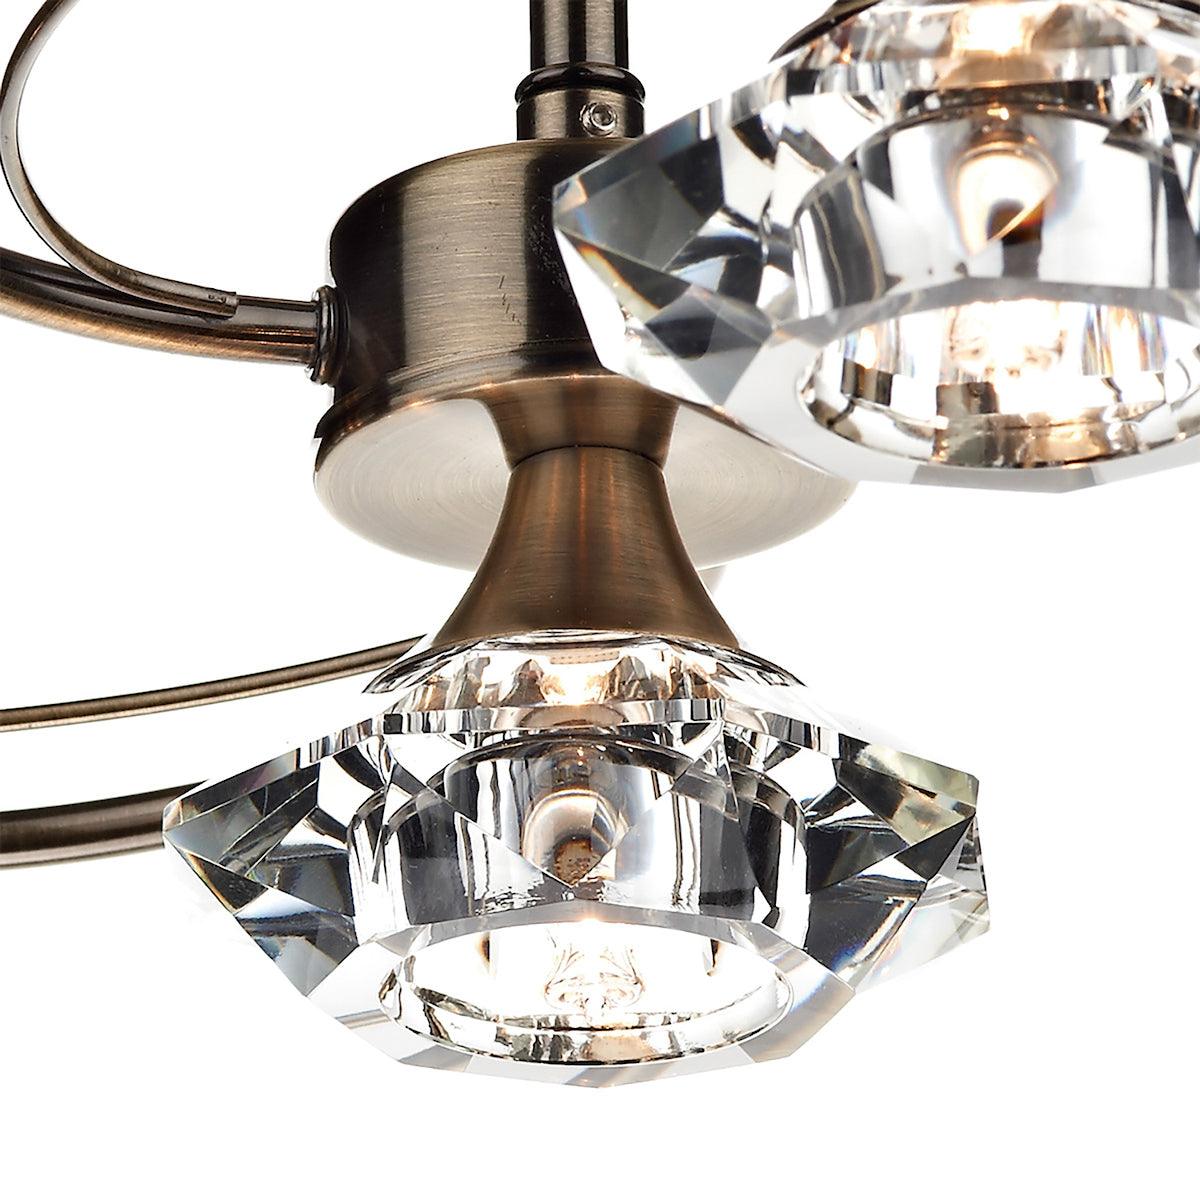 Luther 4 Light Semi Flush complete with Crystal Glass Antique Brass - Peter Murphy Lighting & Electrical Ltd